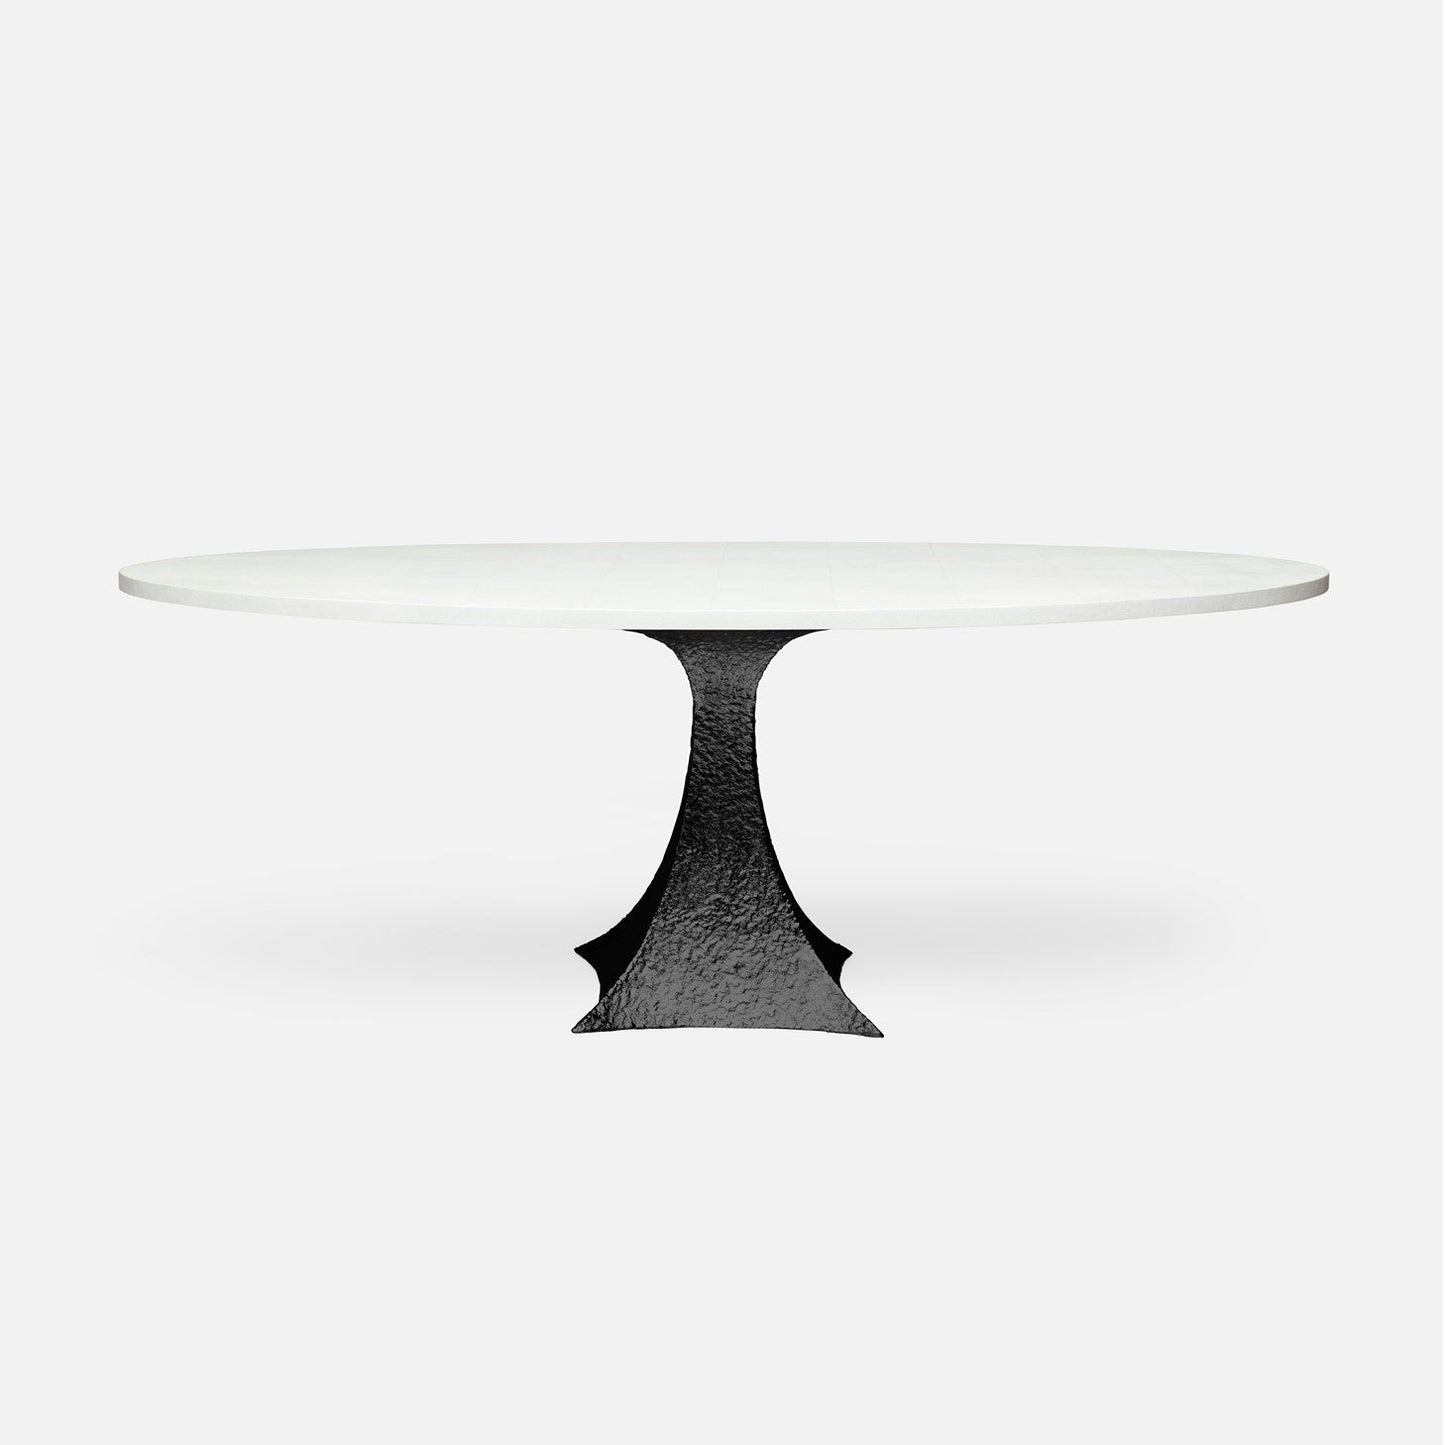 Made Goods Noor 72" x 42" x 30" Single Base Bumpy Black Iron Dinning Table With Oval Pristine Vintage Faux Shagreen Table Top